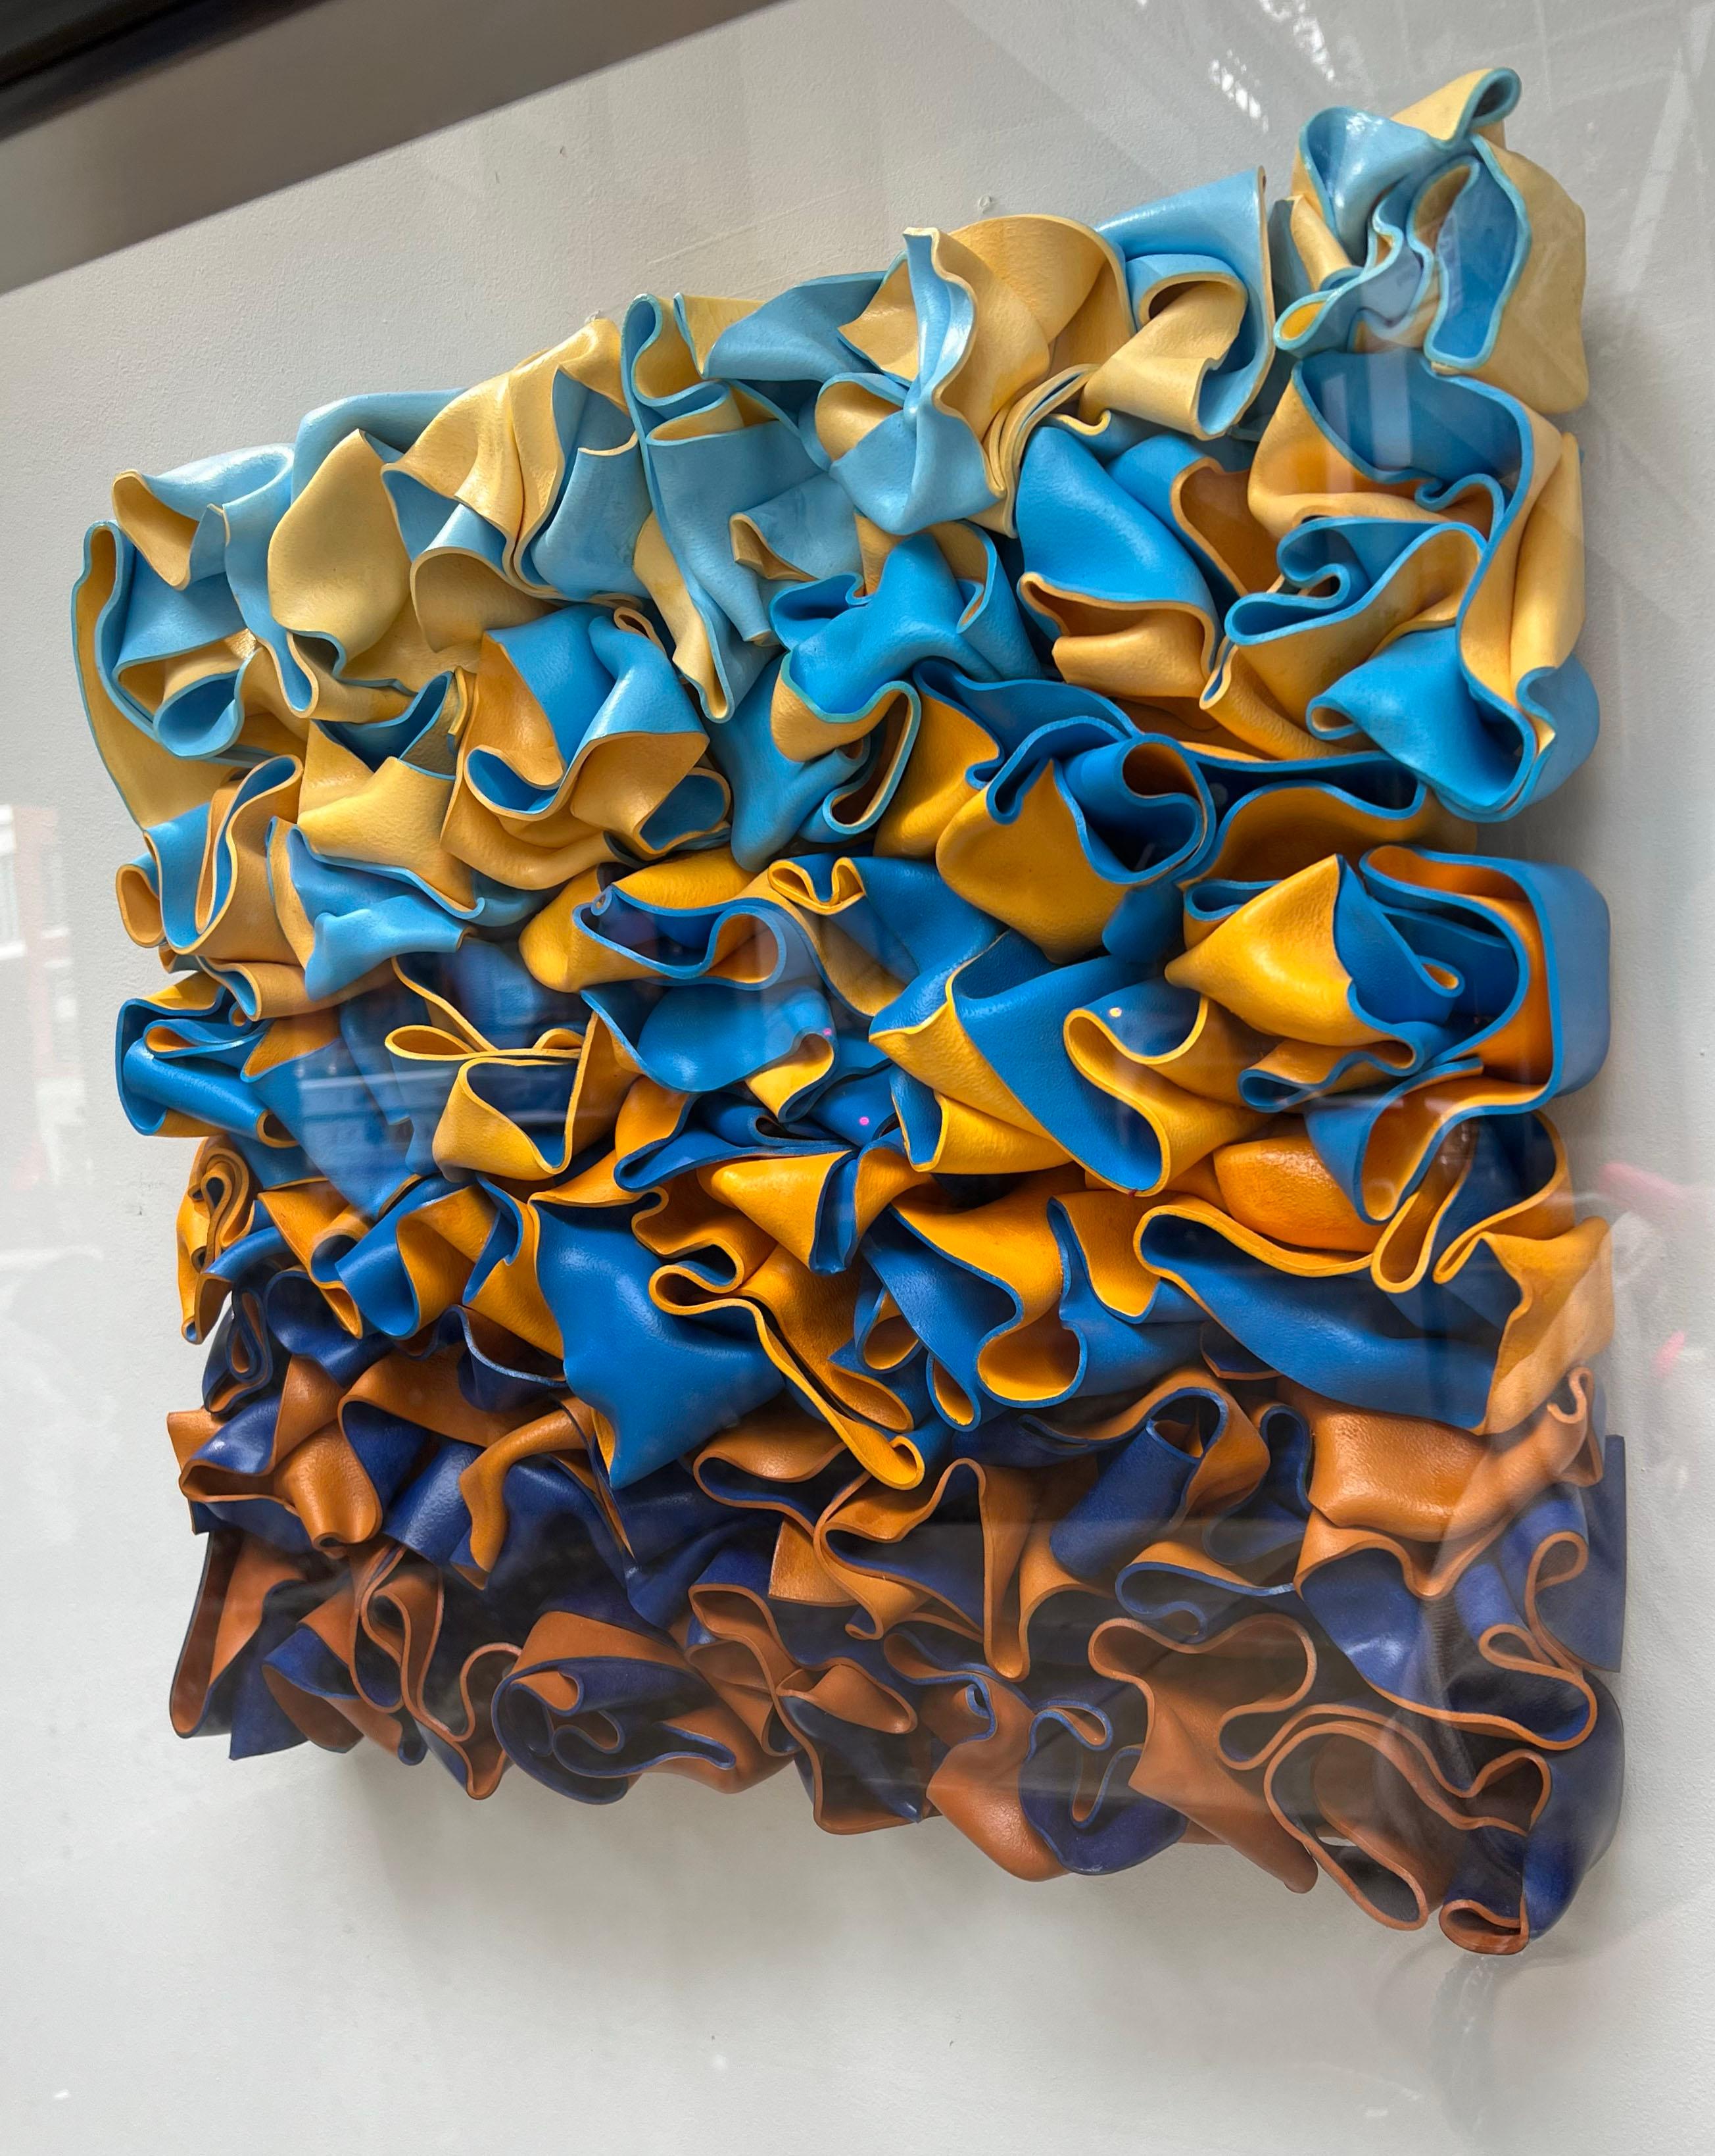 An abstract sculpture hand molded with styrene. This piece is very consist of bright yellow and blue, contrasting against each other. 

Rick Lazes is a three dimensional artist who works in a variety of media including wood, plaster, stainless